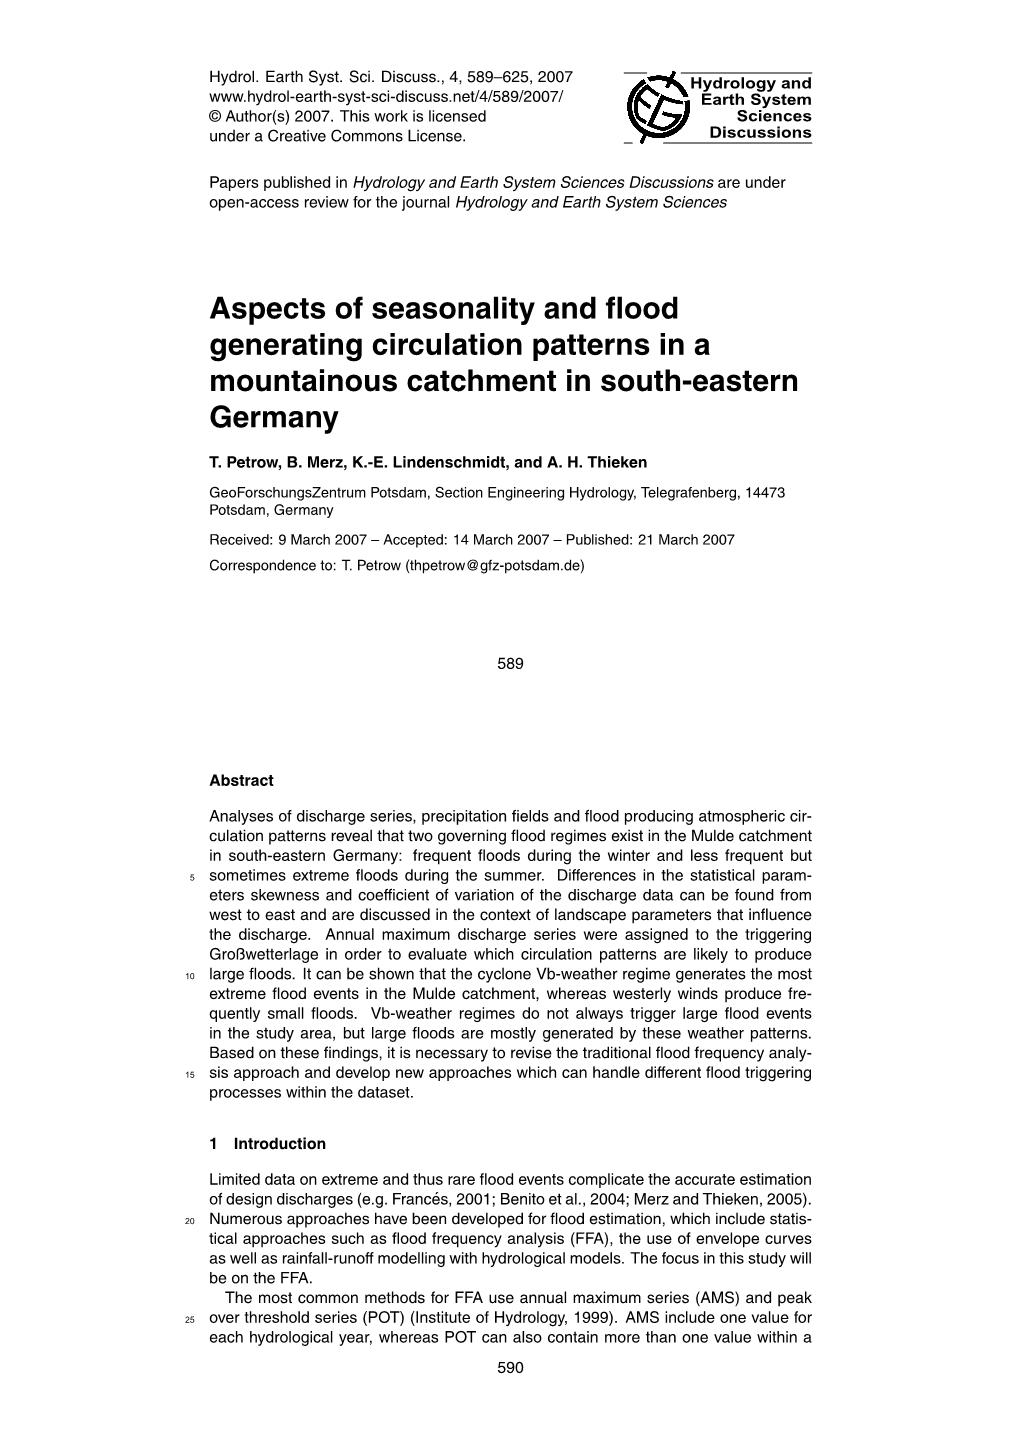 Aspects of Seasonality and Flood Generating Circulation Patterns in a Mountainous Catchment in South-Eastern Germany